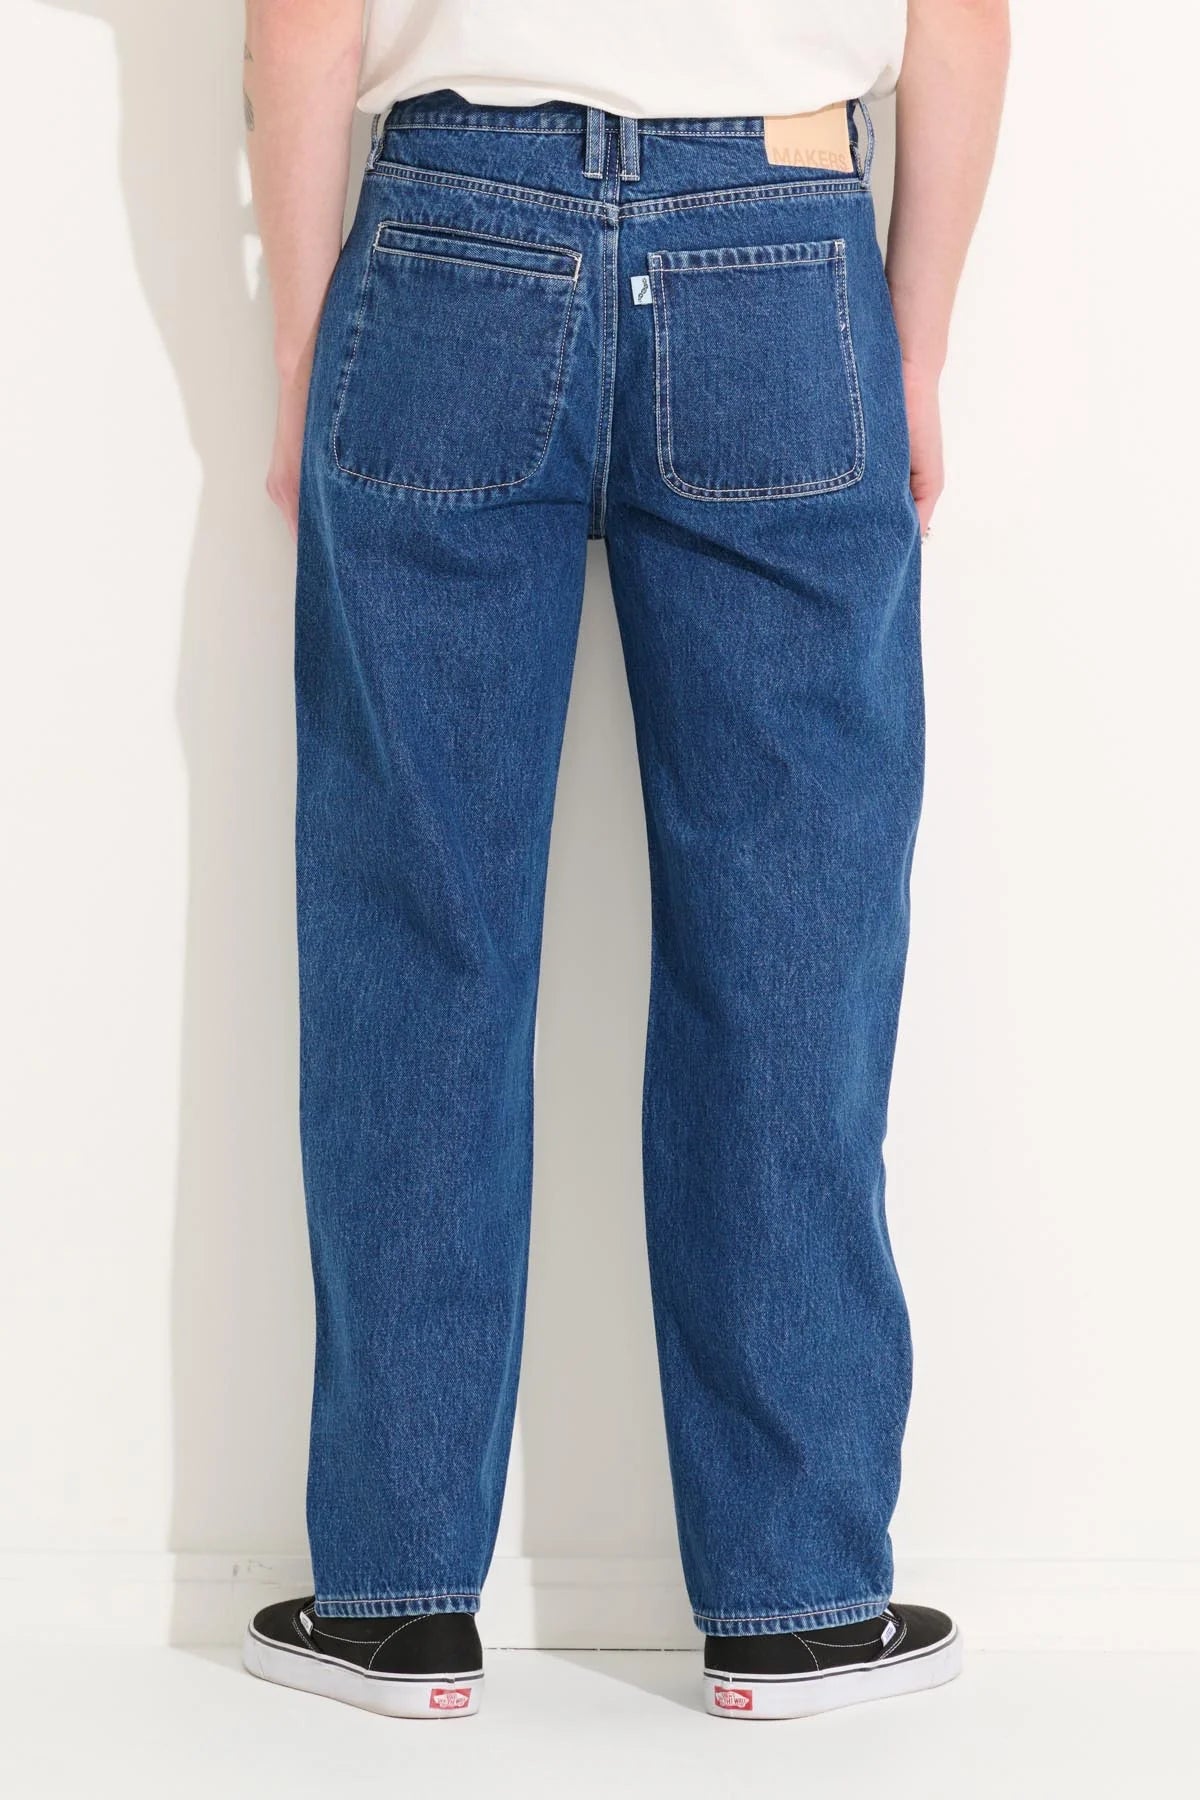 Misfit Makers Men's Relaxed Jean - Indigo